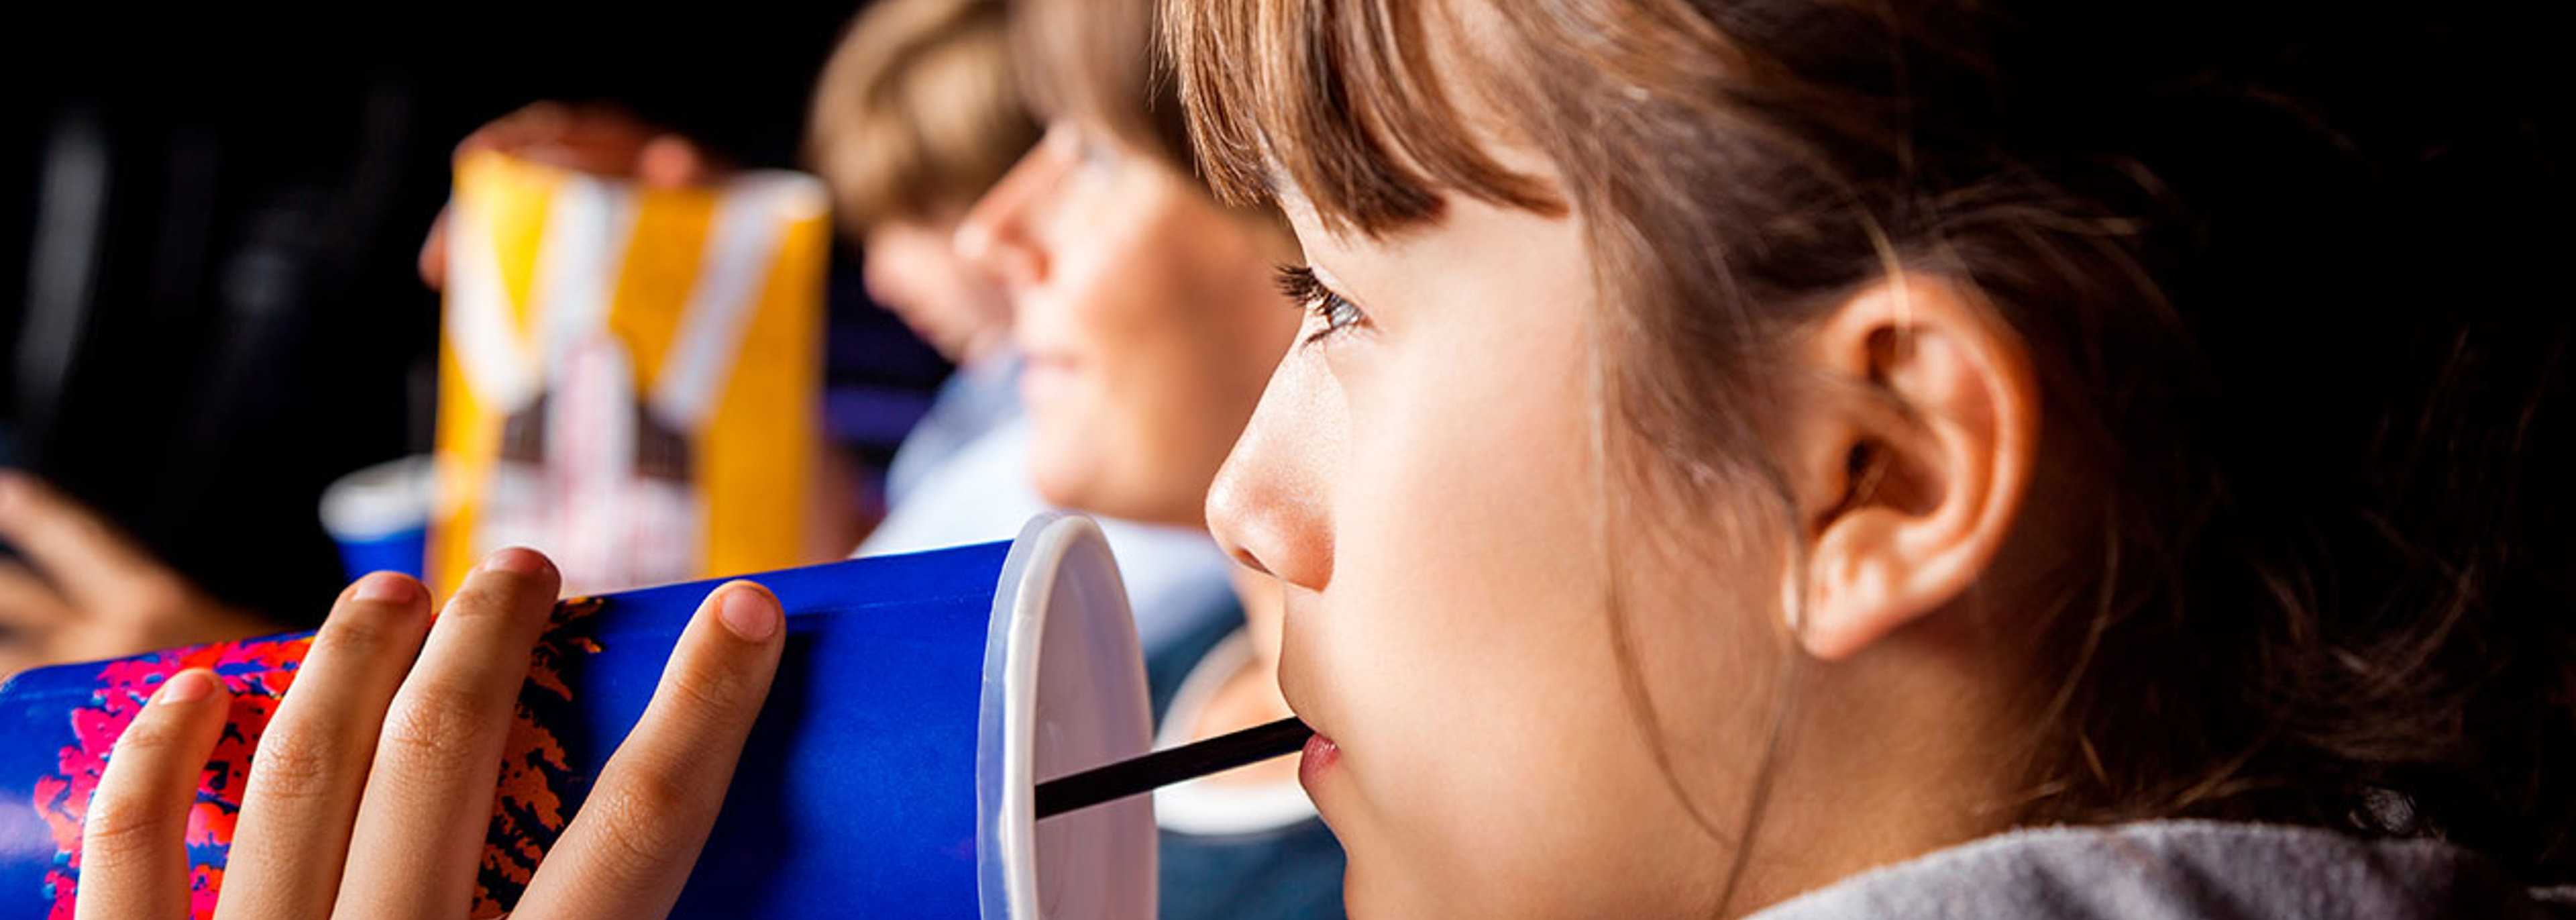 Could sugary drinks tax extend free school meals?